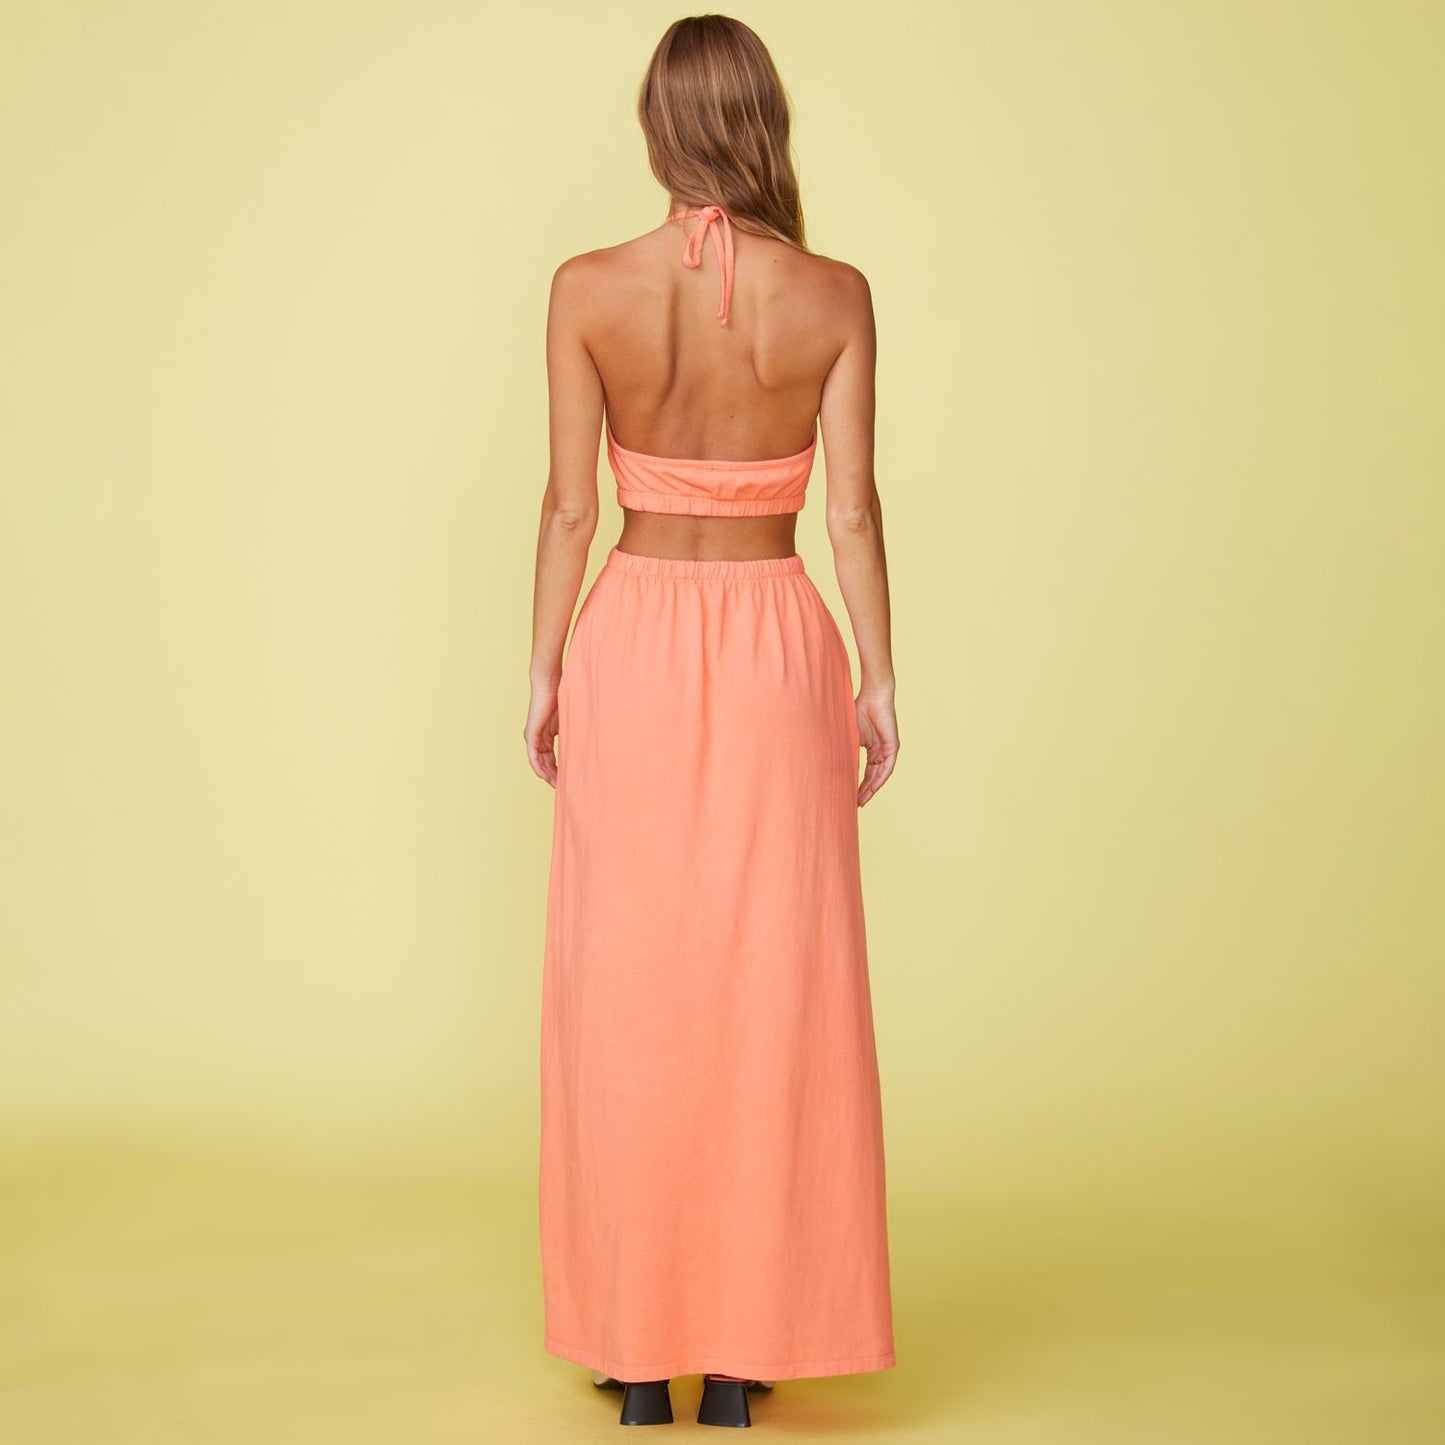 Back View of model wearing the Cut Out Halter Dress in Georgia Peach.